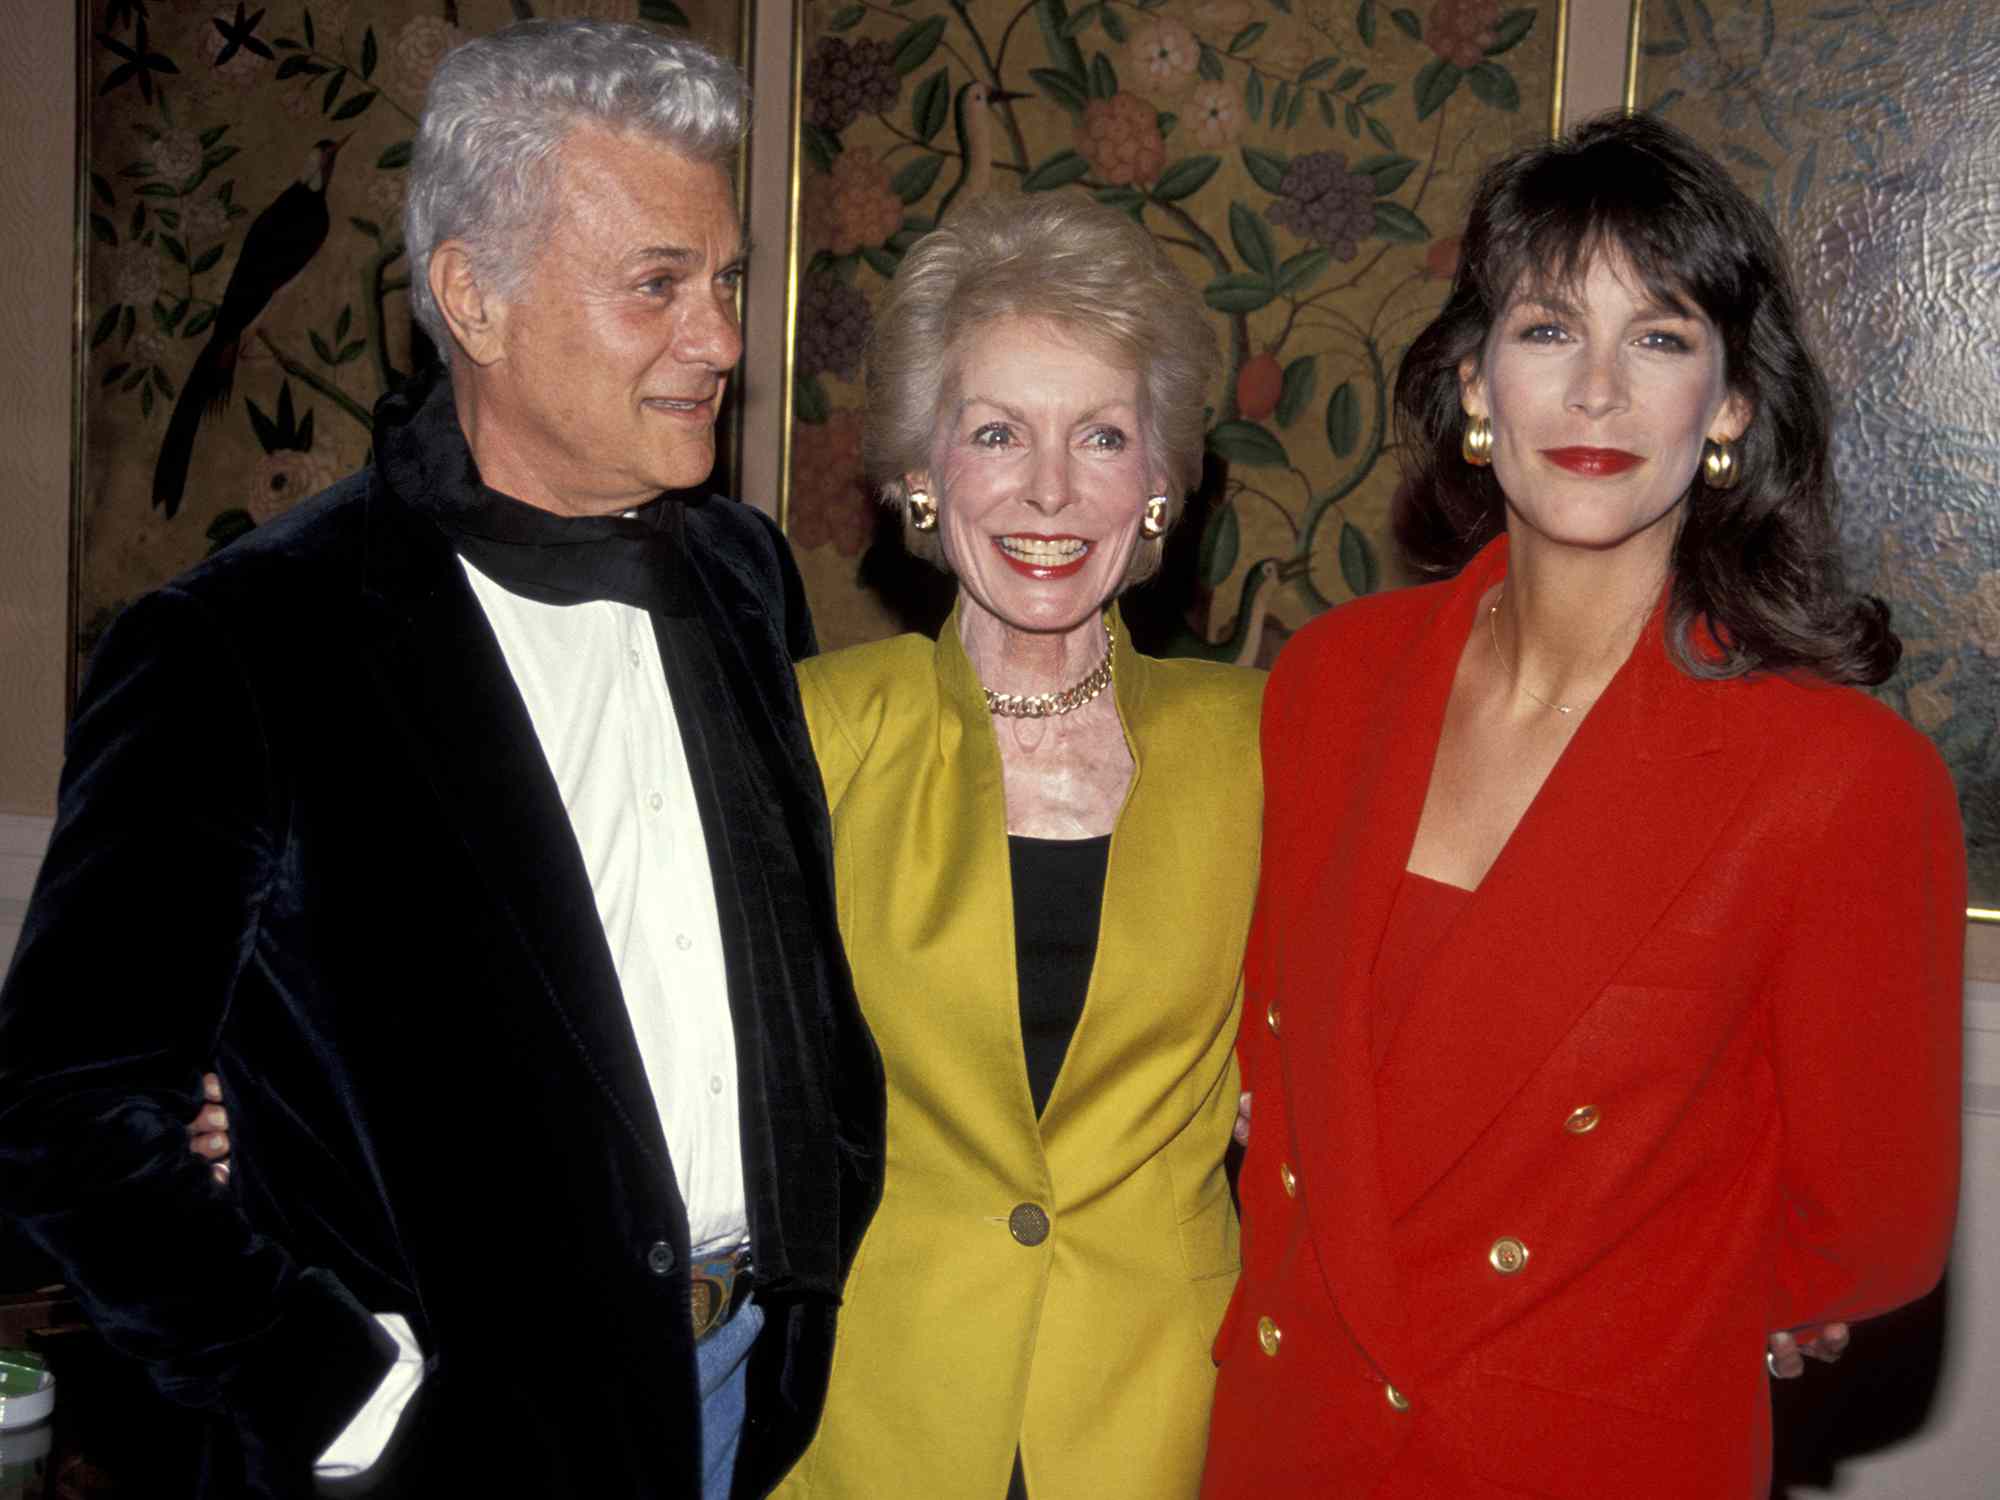 Tony Curtis, Janet Leigh, and Jamie Lee Curtis.